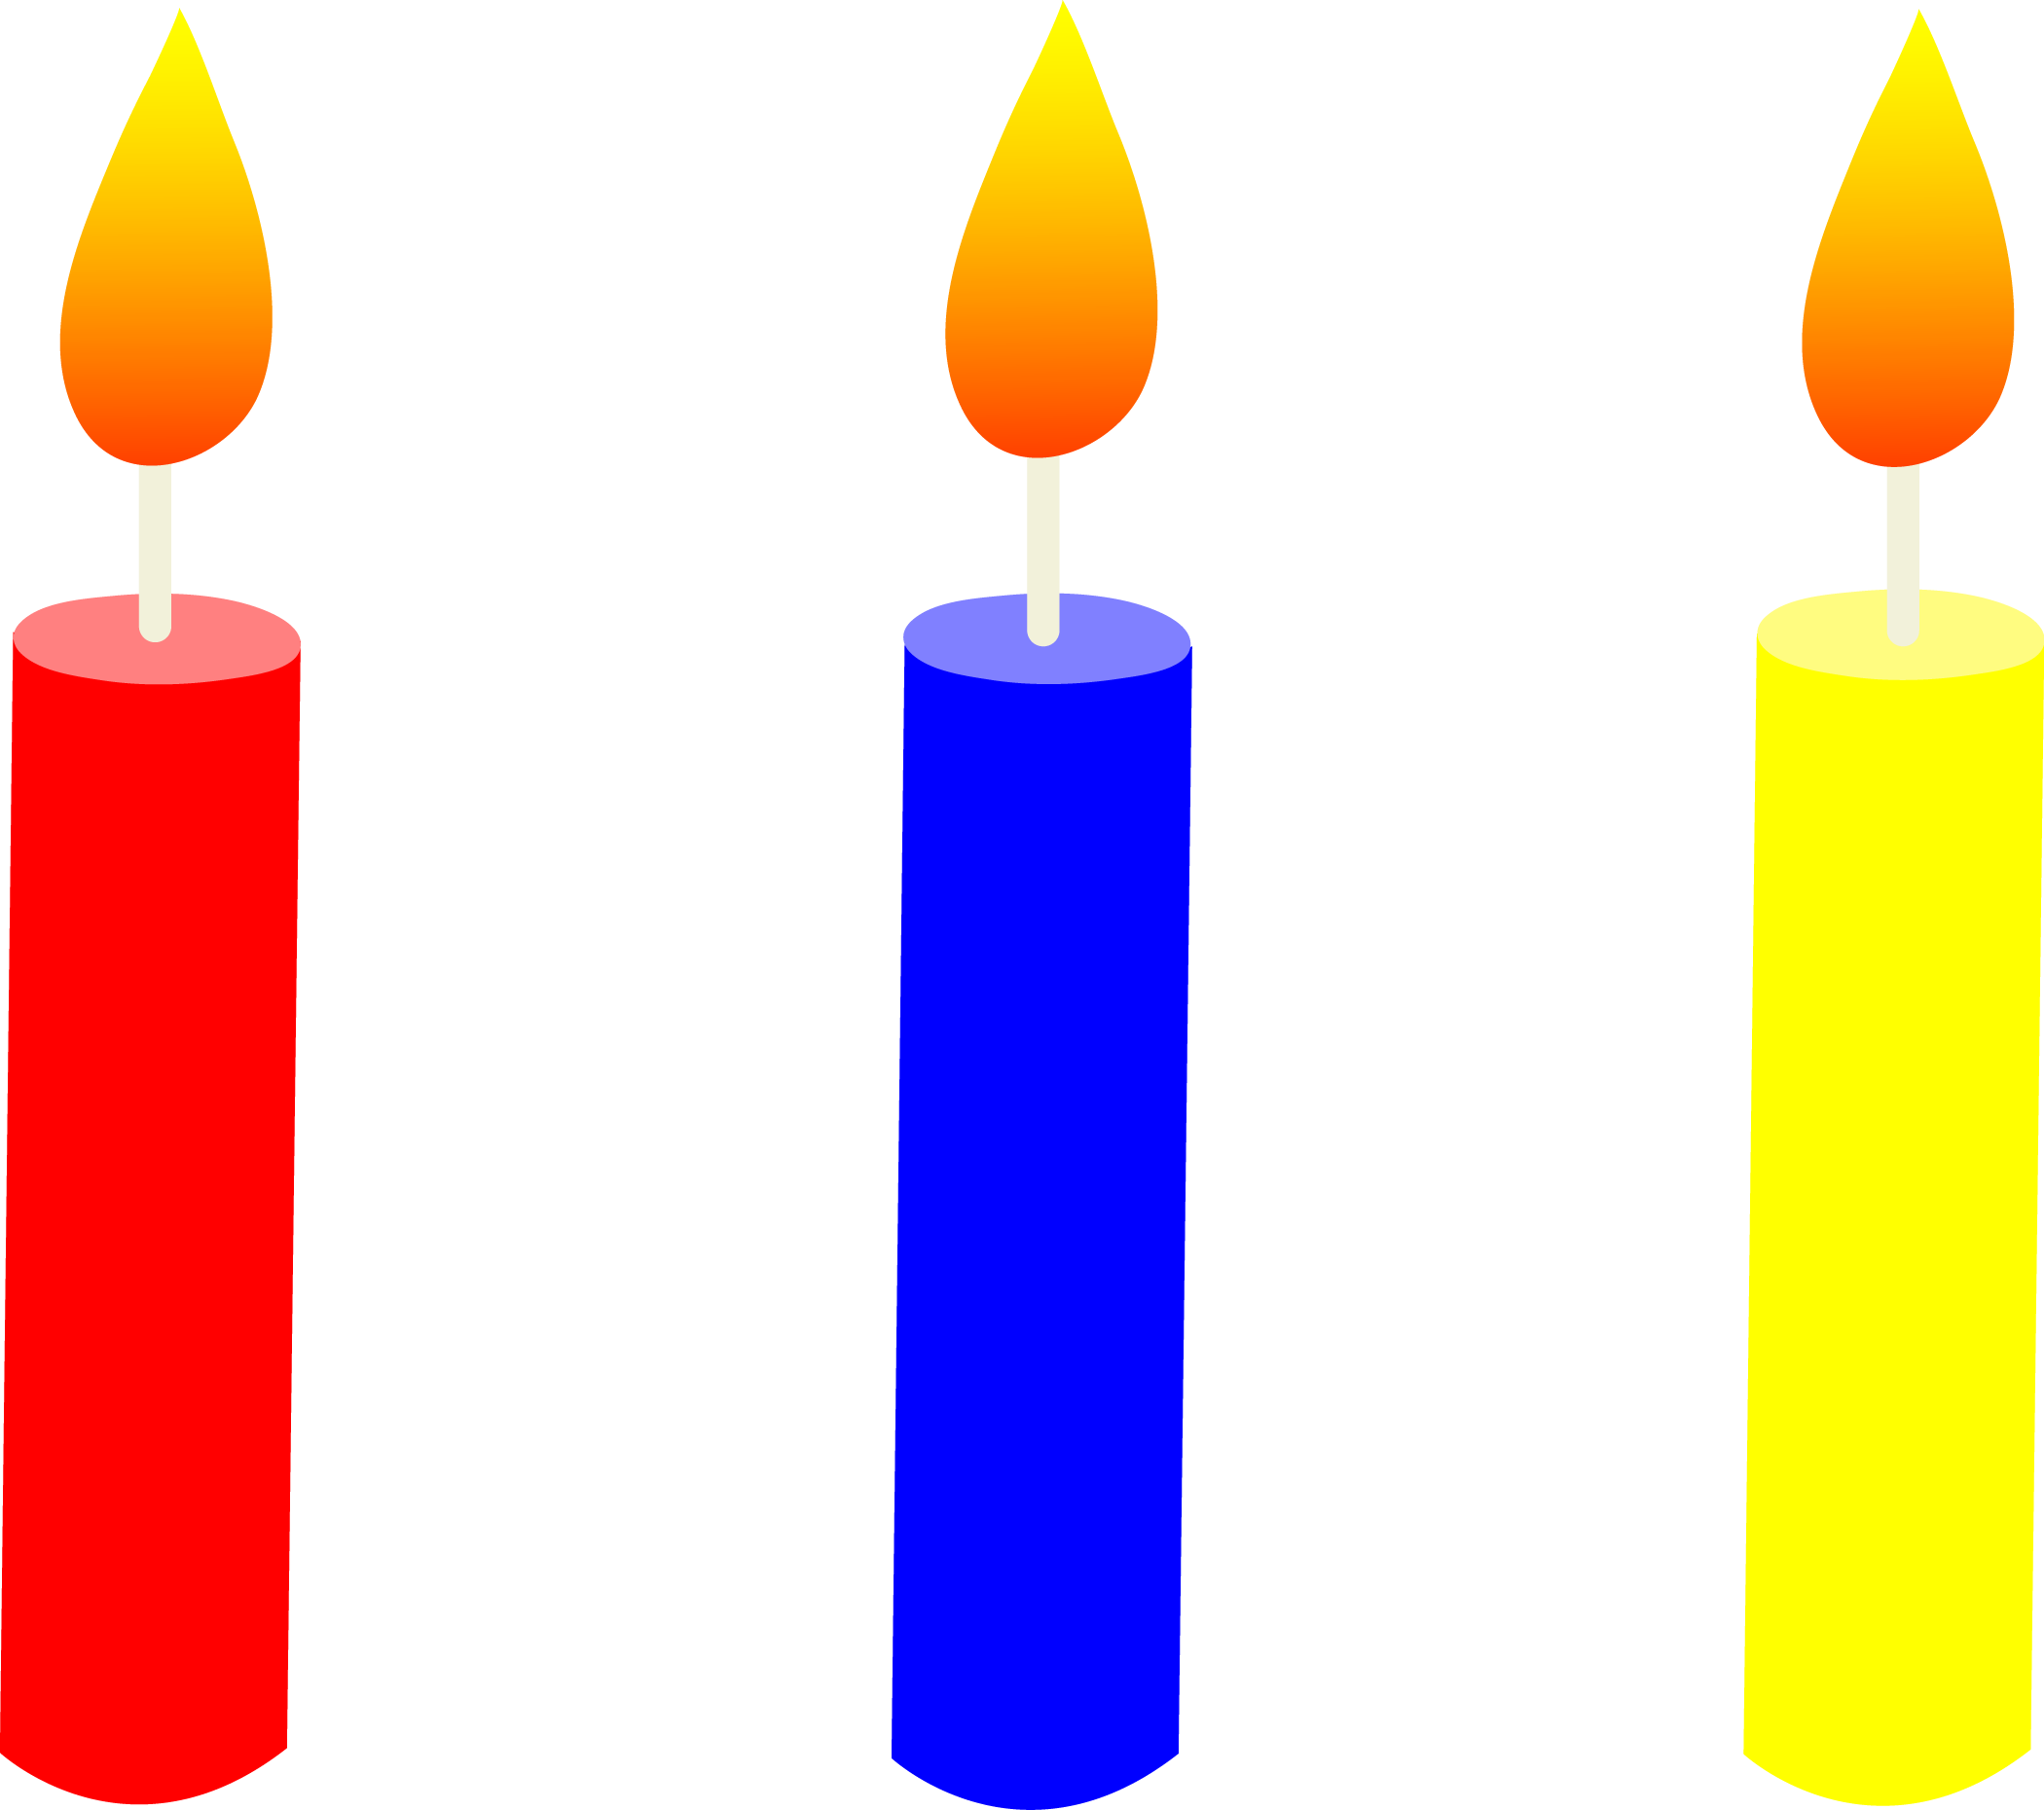 Candle Flame Art | Clipart Panda - Free Clipart Images